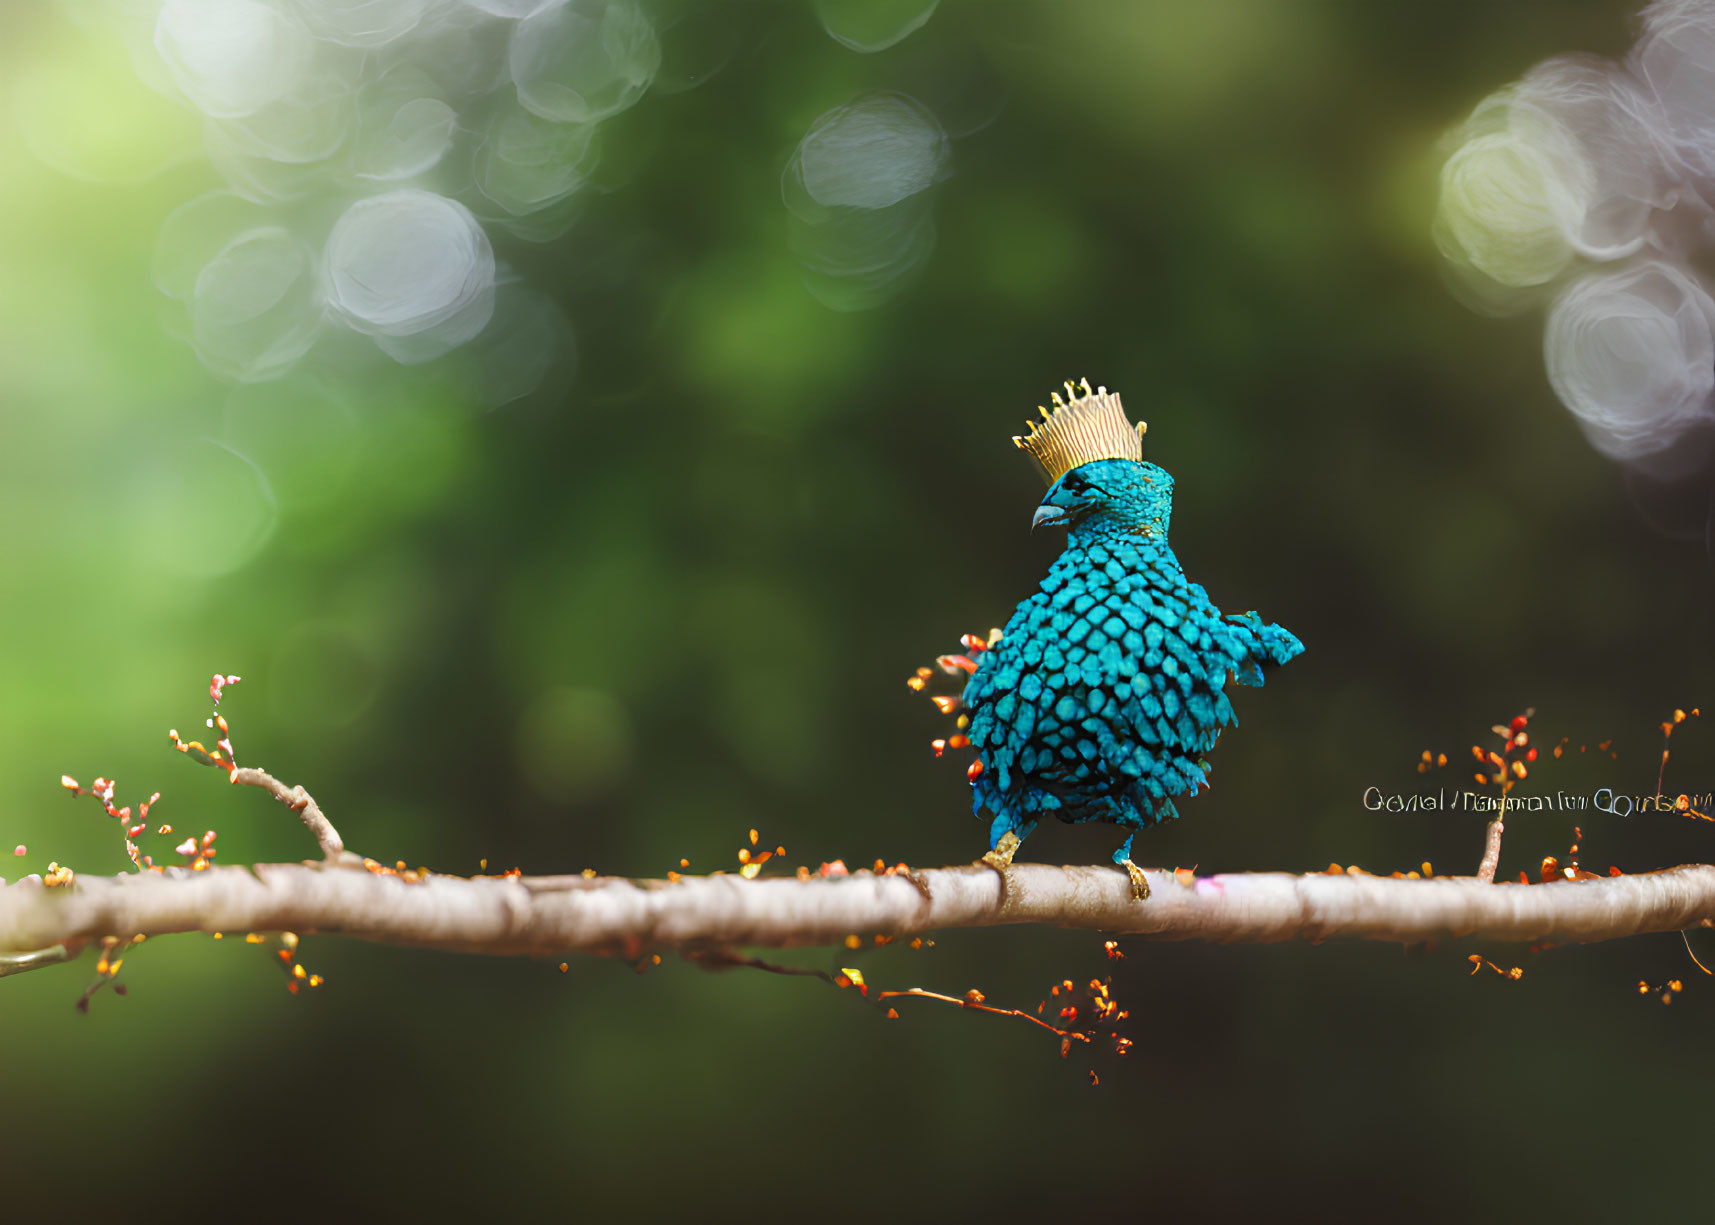 Blue Jeweled Bird Sculpture with Crown Perched on Twig in Soft-focus Green Background